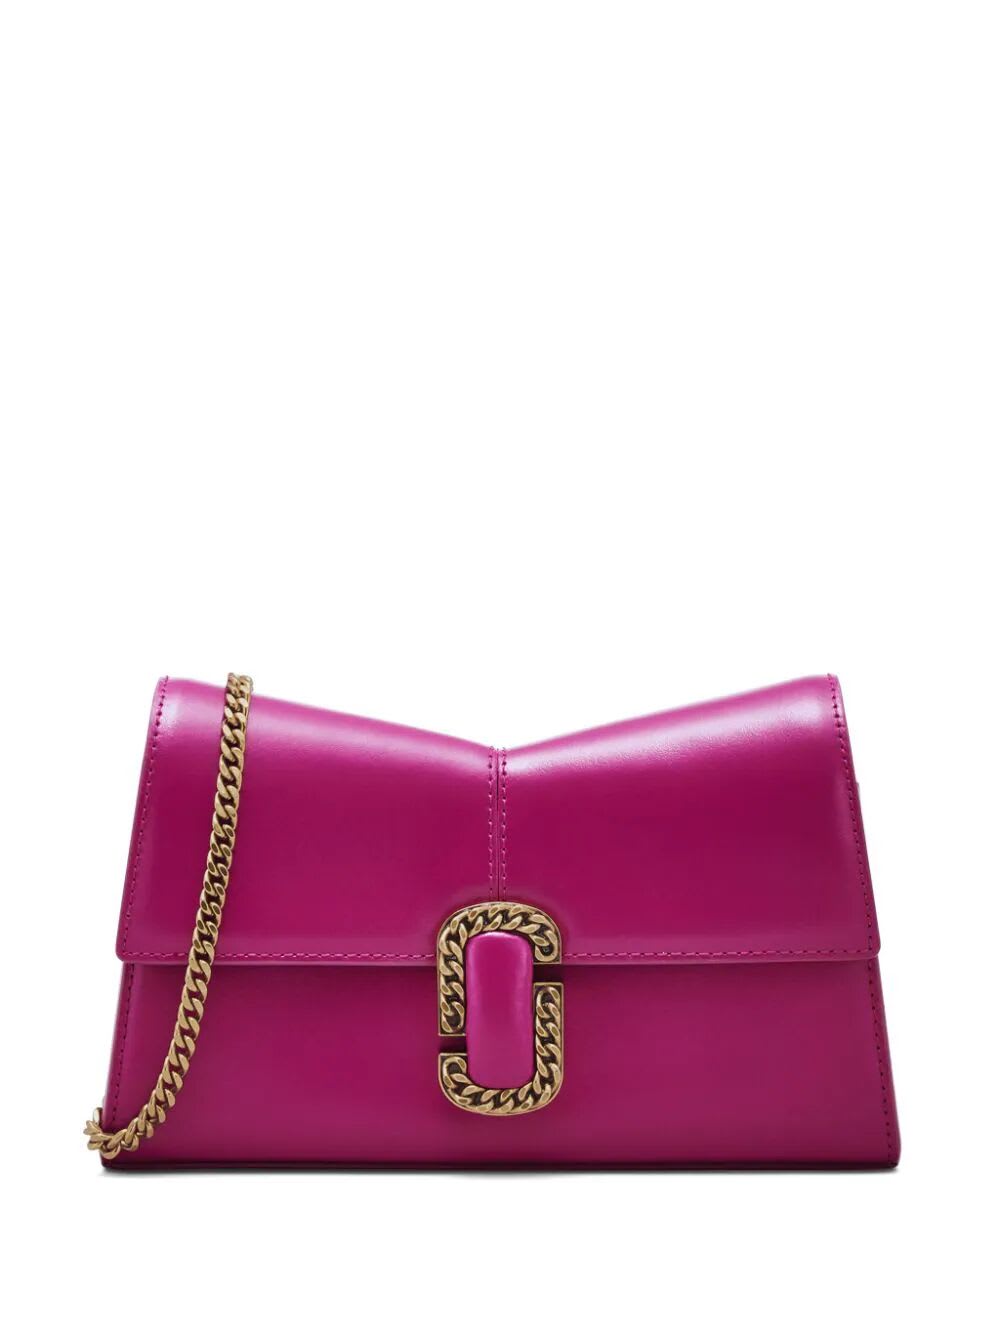 Marc Jacobs The Chain Wallet In Lipstick Pink